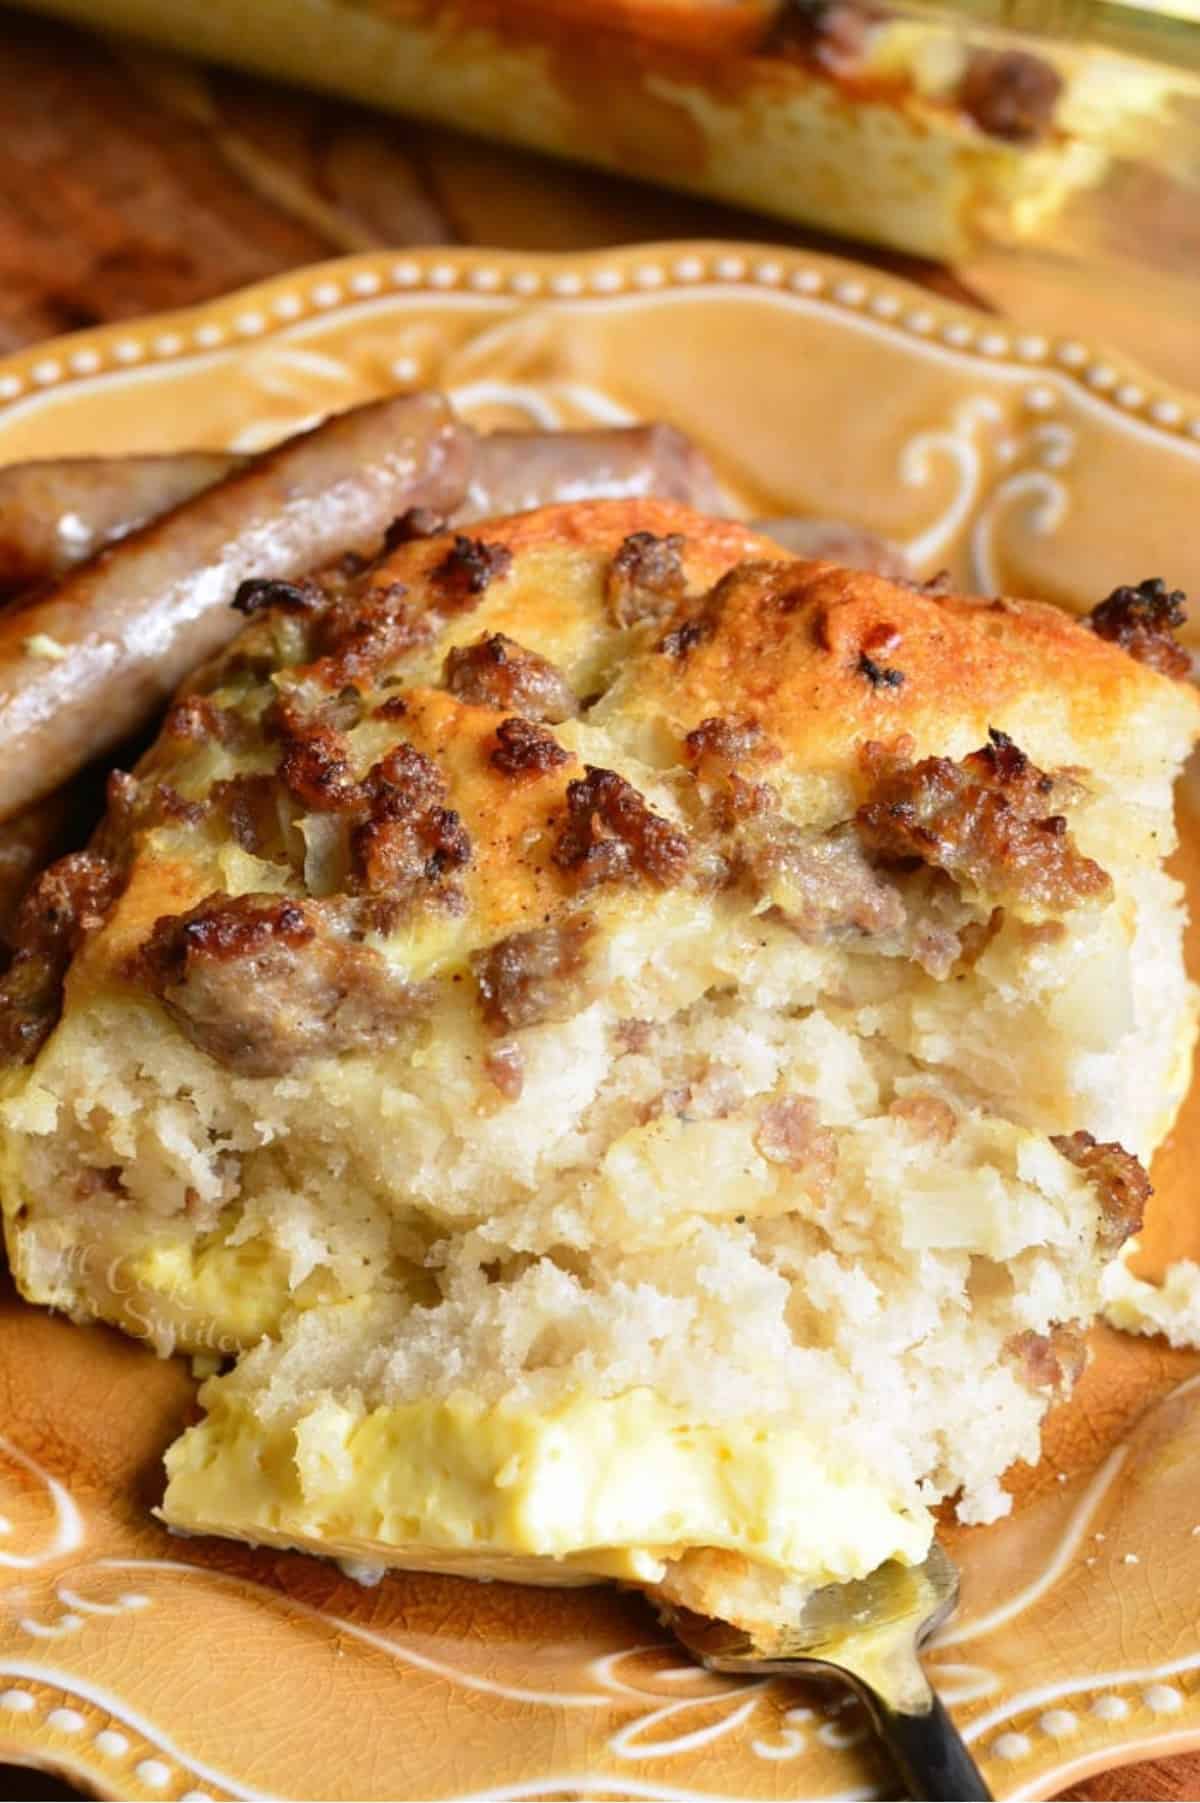 piece of sausage breakfast casserole on a plate with sausage on the side and bite on a fork.